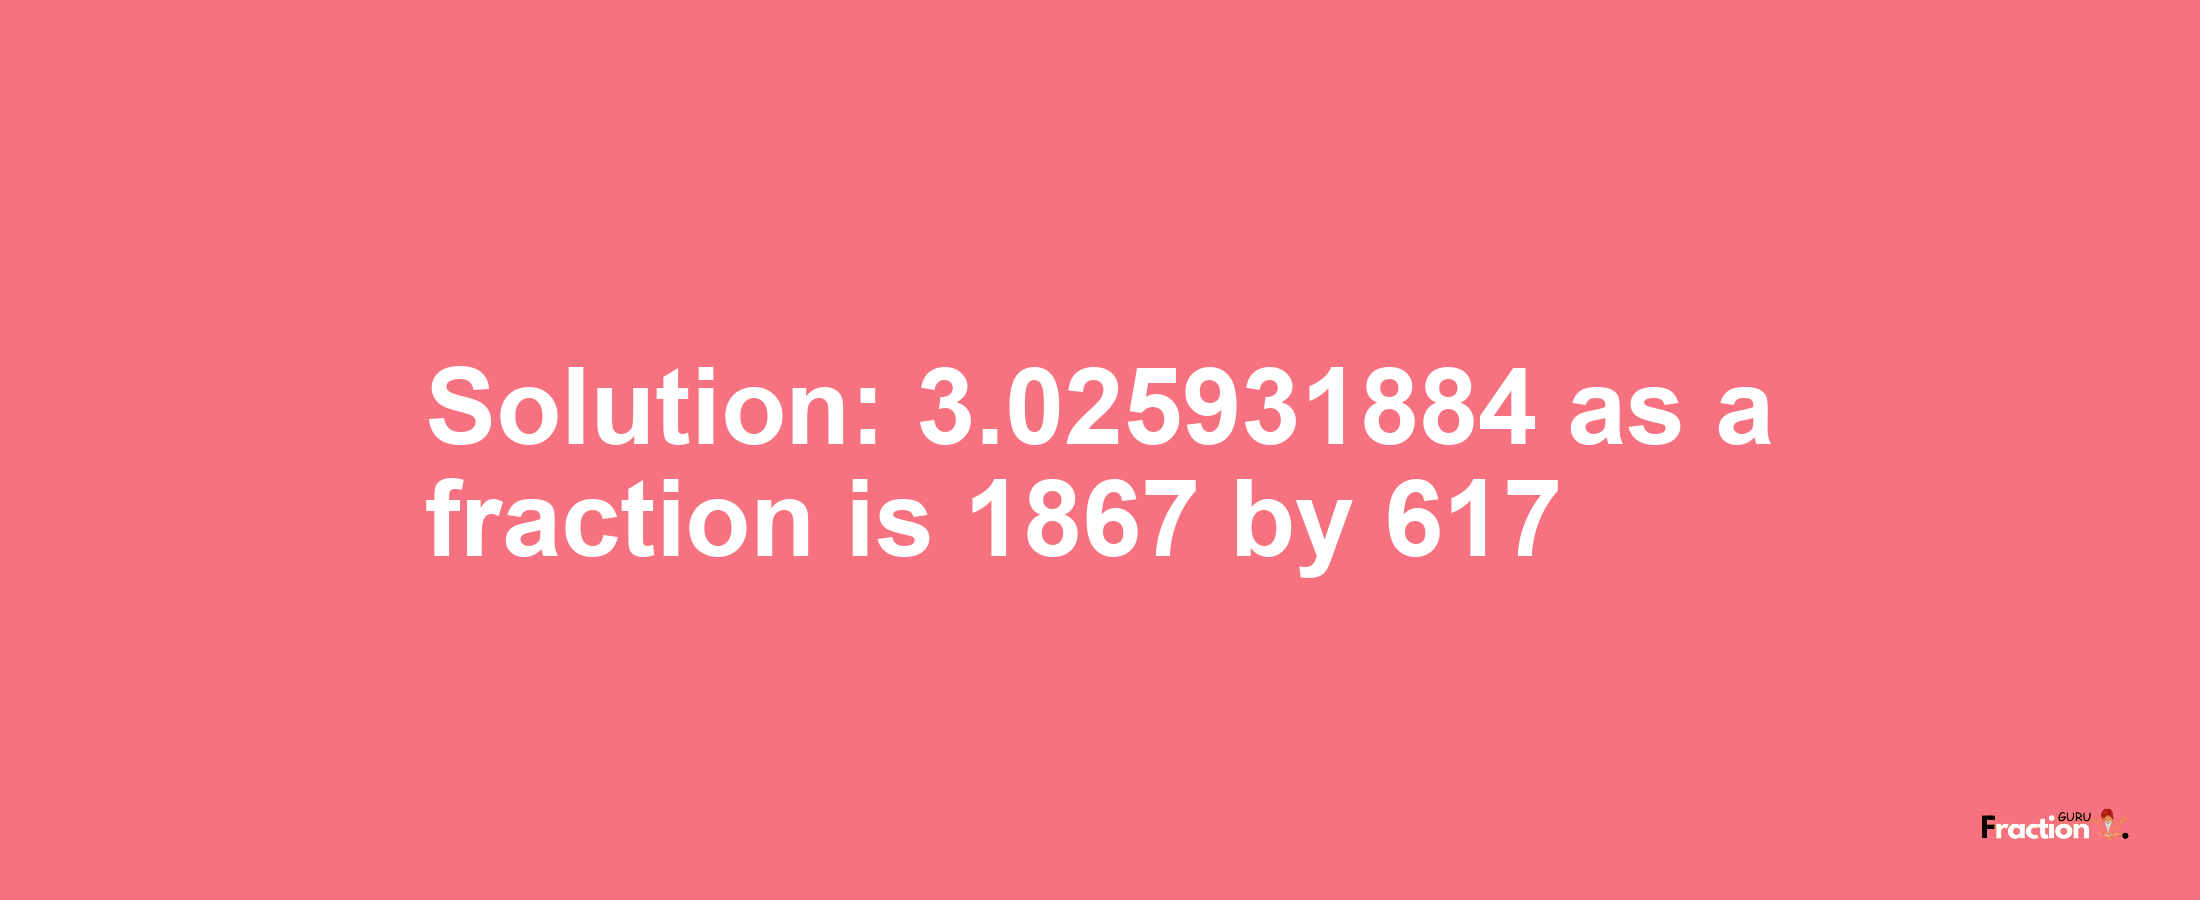 Solution:3.025931884 as a fraction is 1867/617